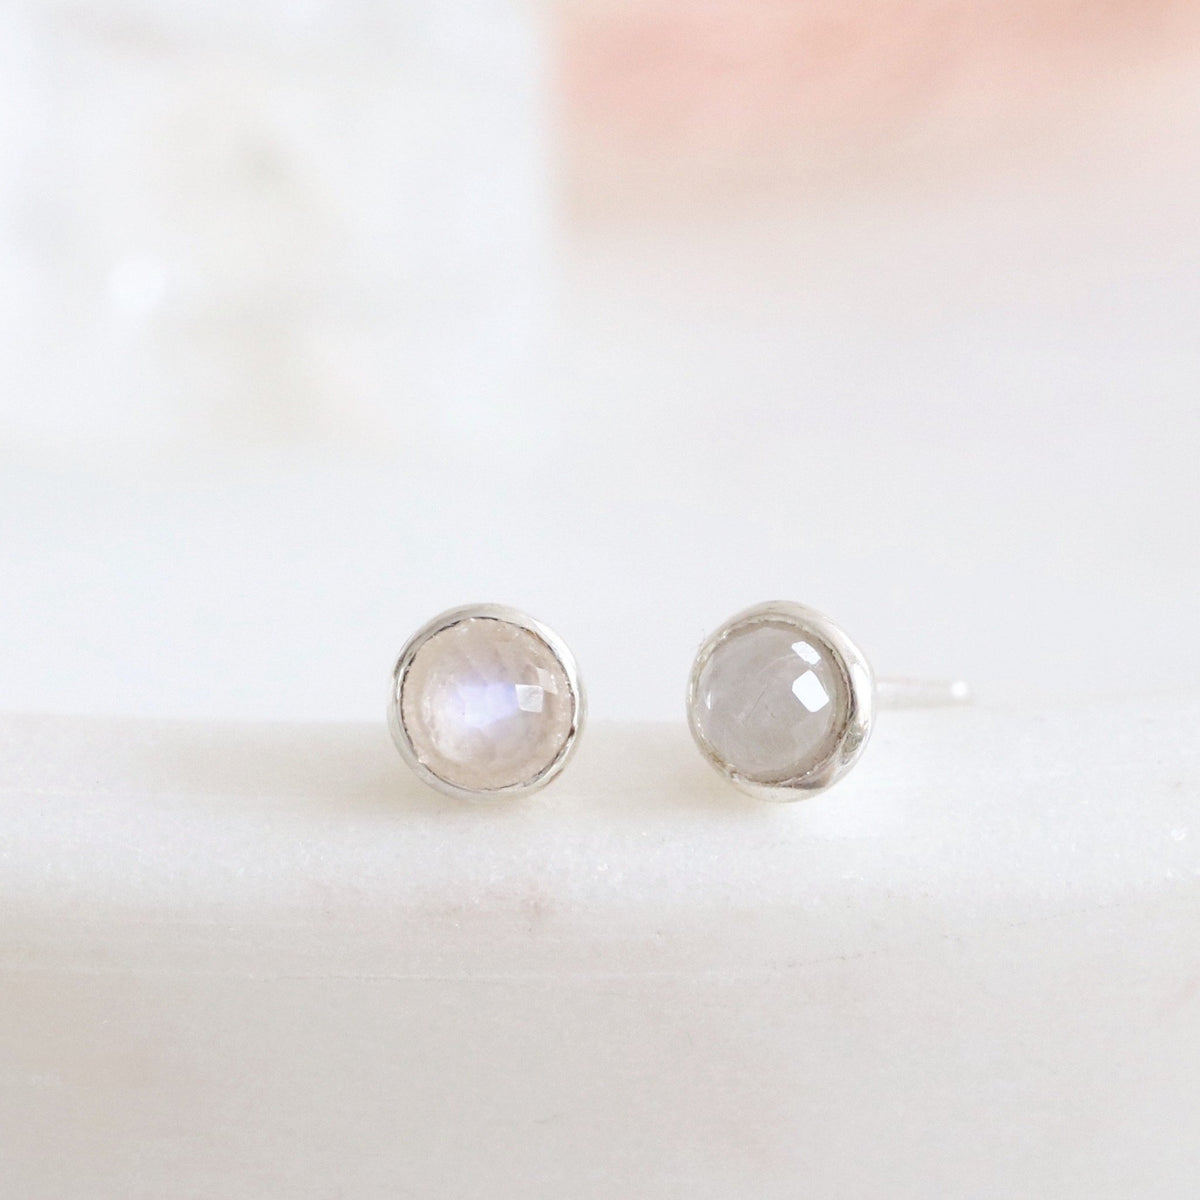 TINY PROTECT STUD EARRINGS - RAINBOW MOONSTONE &amp; SILVER - SO PRETTY CARA COTTER